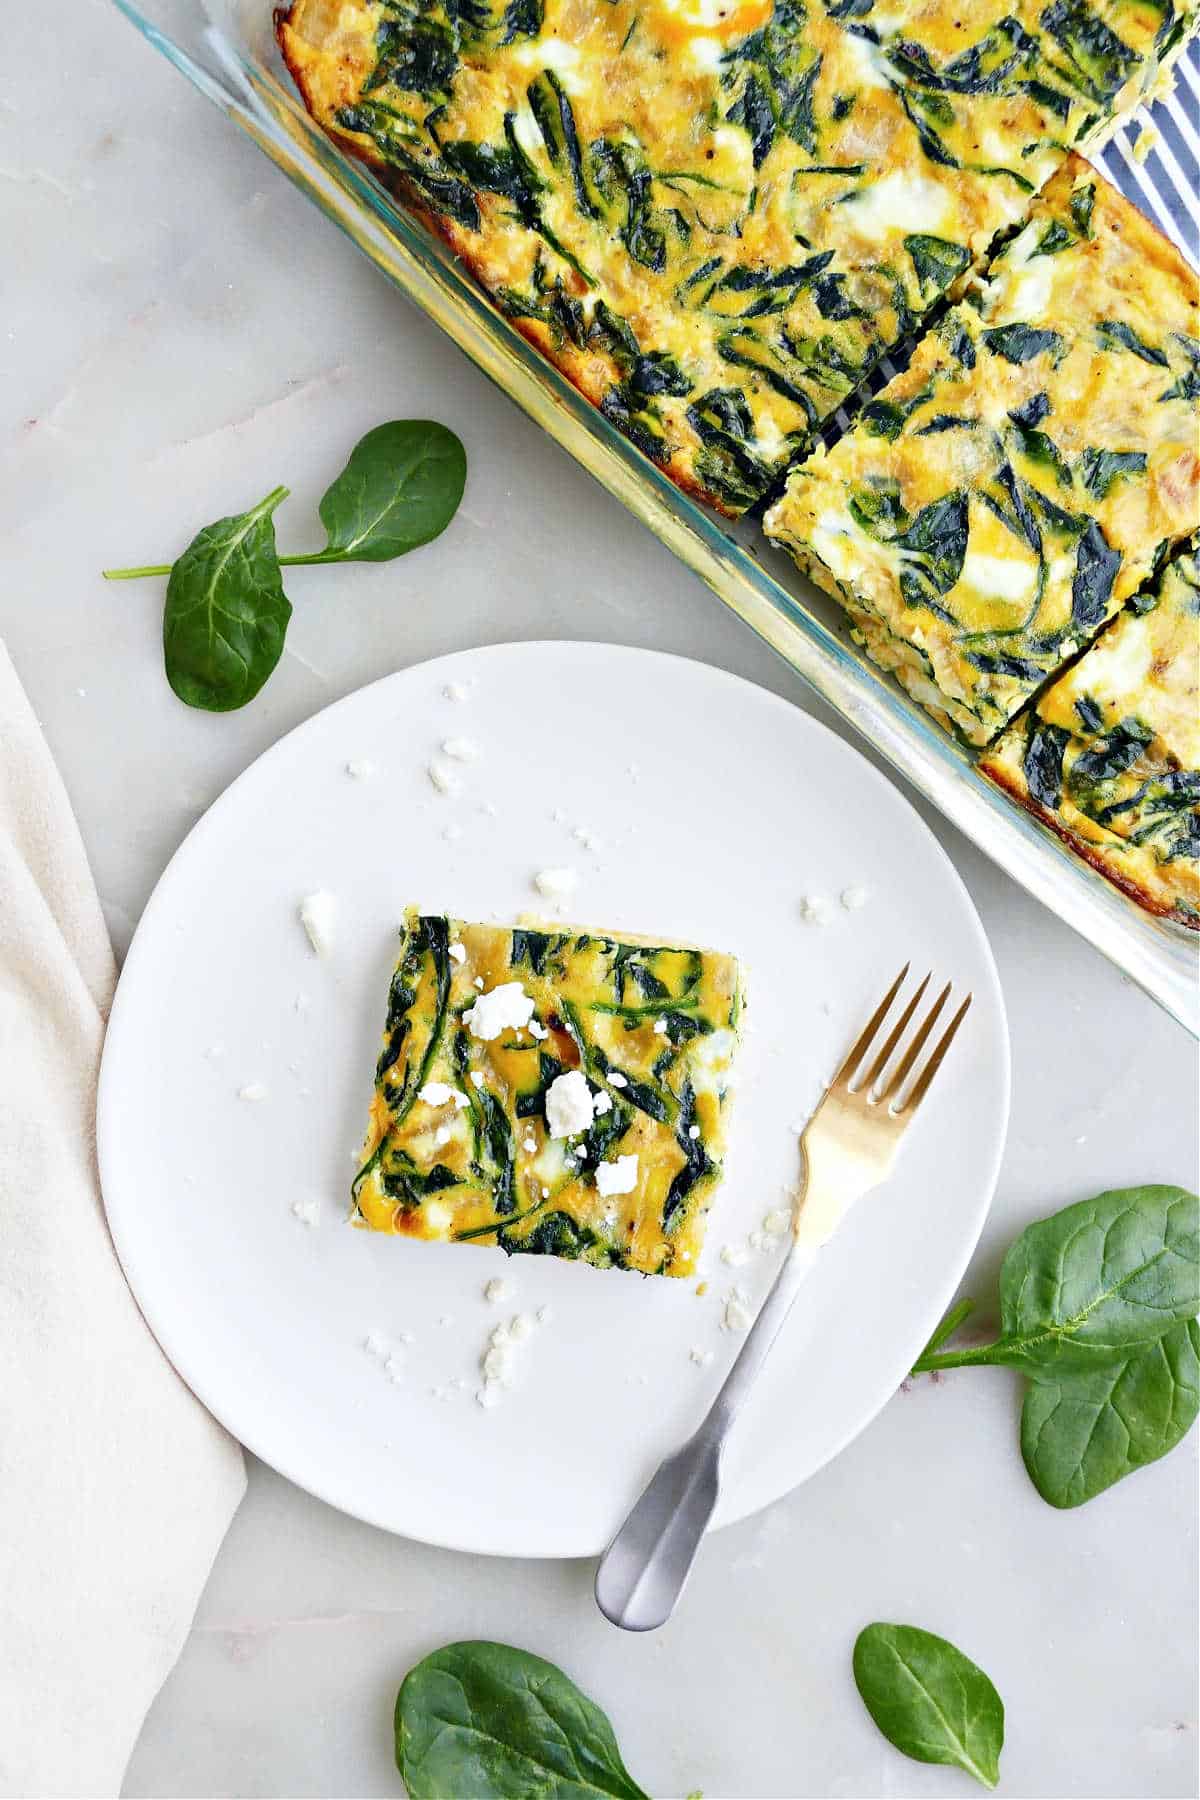 Spinach feta egg bake in a dish, next to a serving on a plate with a fork.